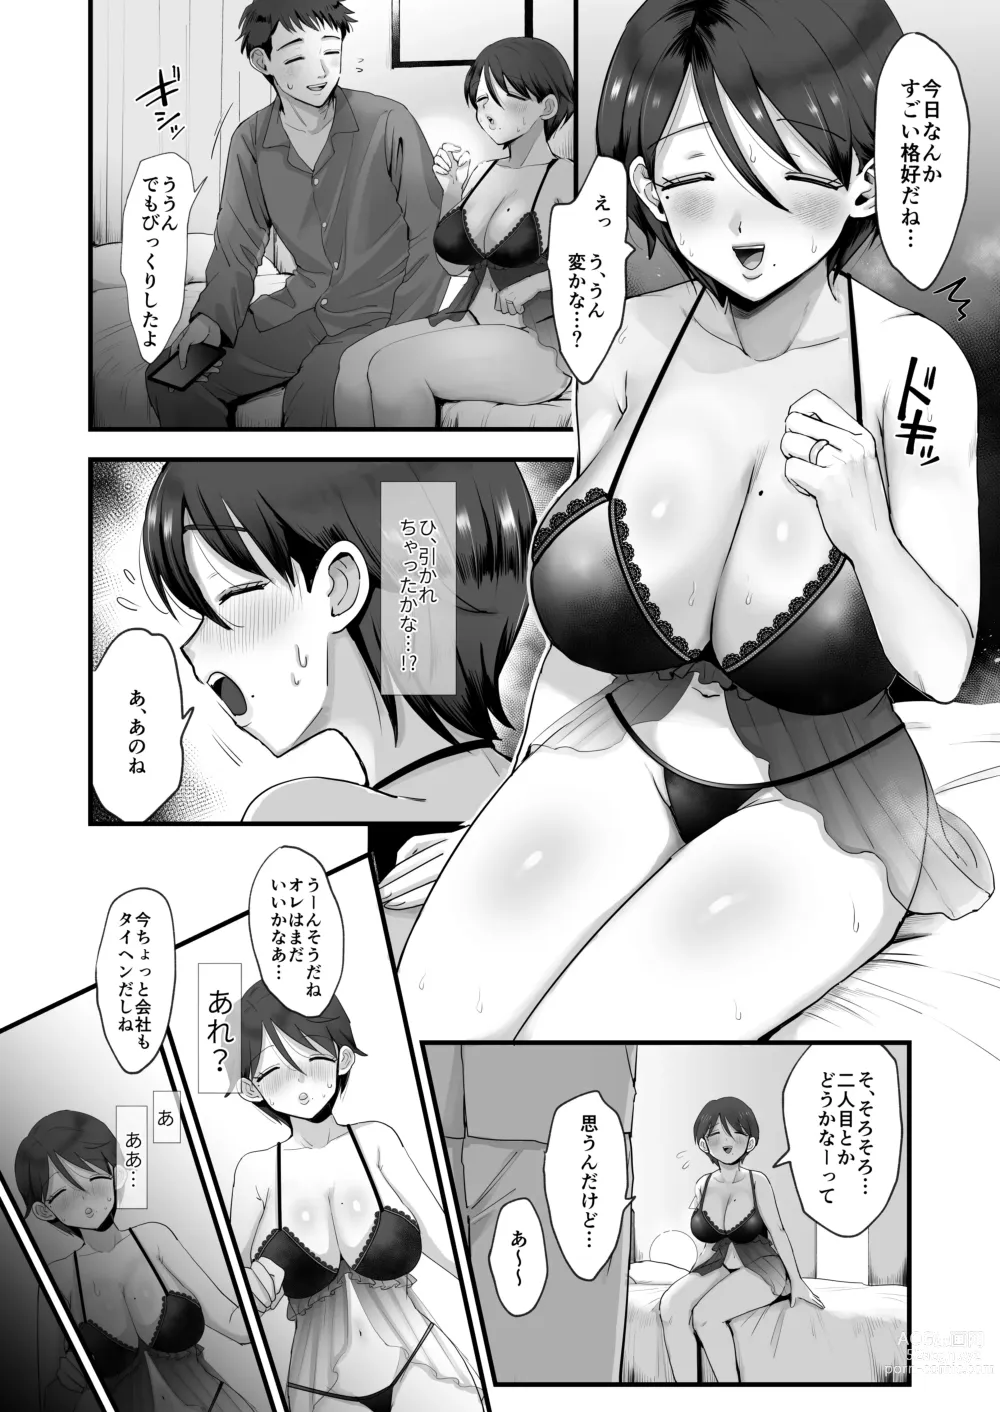 Page 10 of doujinshi Gentle, Busty, Narrow Eyed Momma.